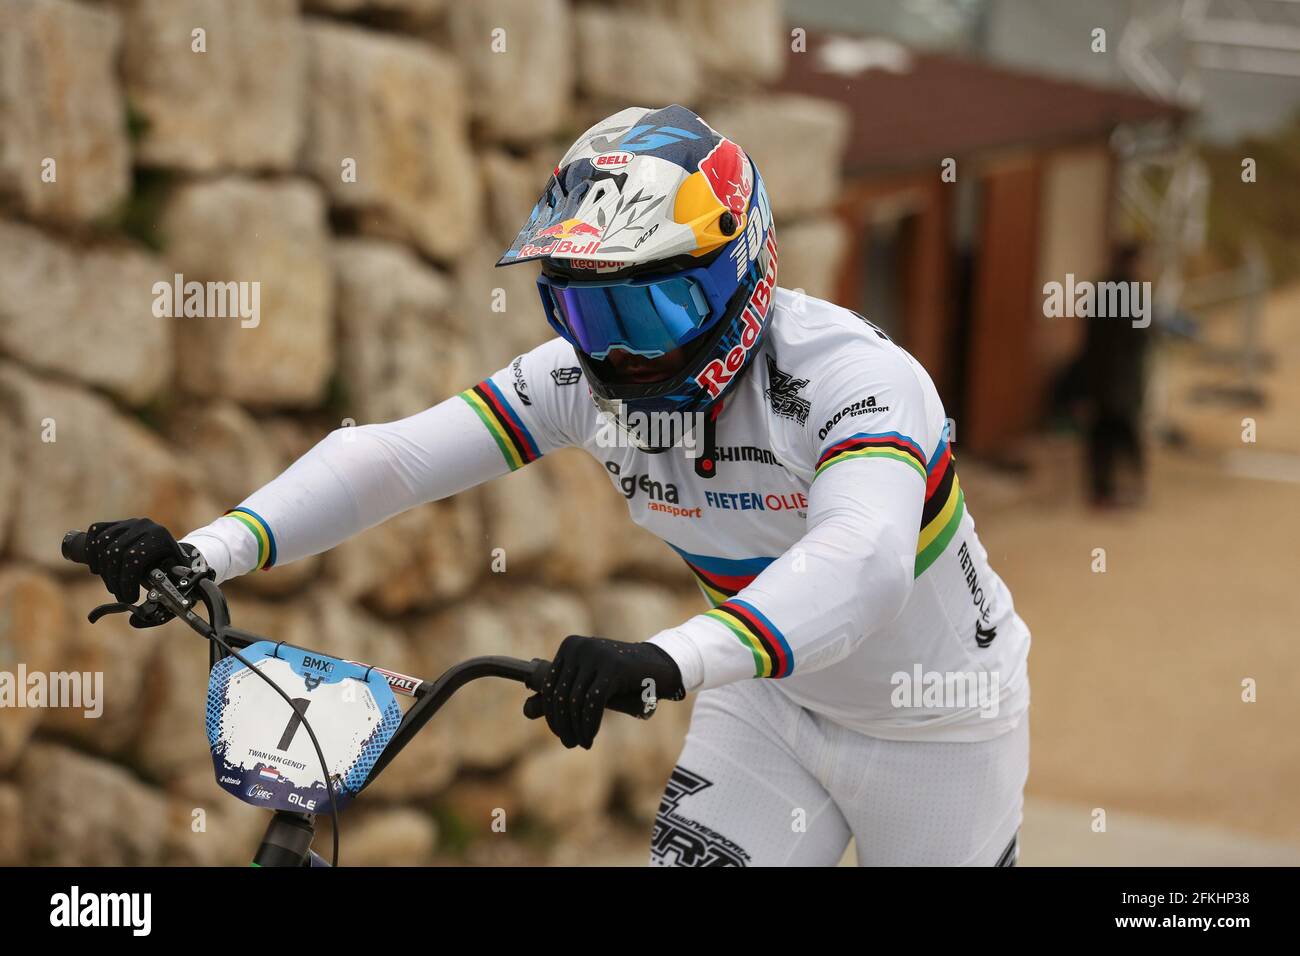 Verona, Italy. 01st May, 2021. Reigning World Champion Twan VAN GENDT of Netherlands (1) competes in the BMX Racing Men Elite Round 1 of the UEC European Cup at the BMX Olympic Arena on May 1st 2021 in Verona, Italy Credit: Mickael Chavet/Alamy Live News Stock Photo